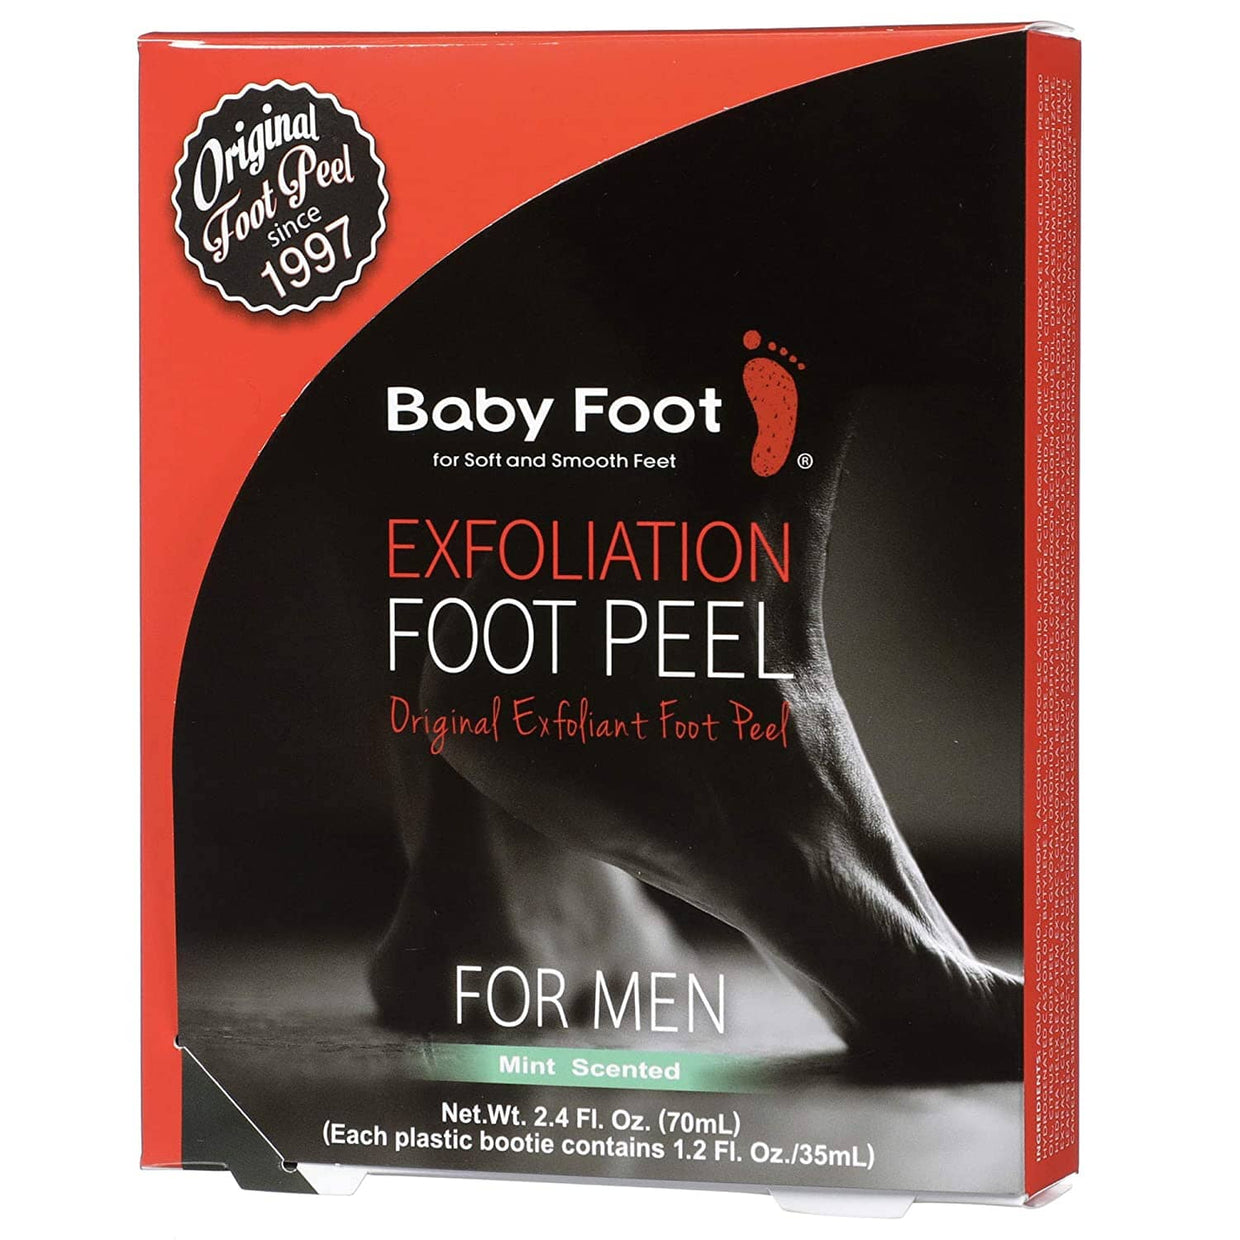 Baby Foot Exfoliant Foot Peel For Men Baby Foot Shop at Exclusive Beauty Club